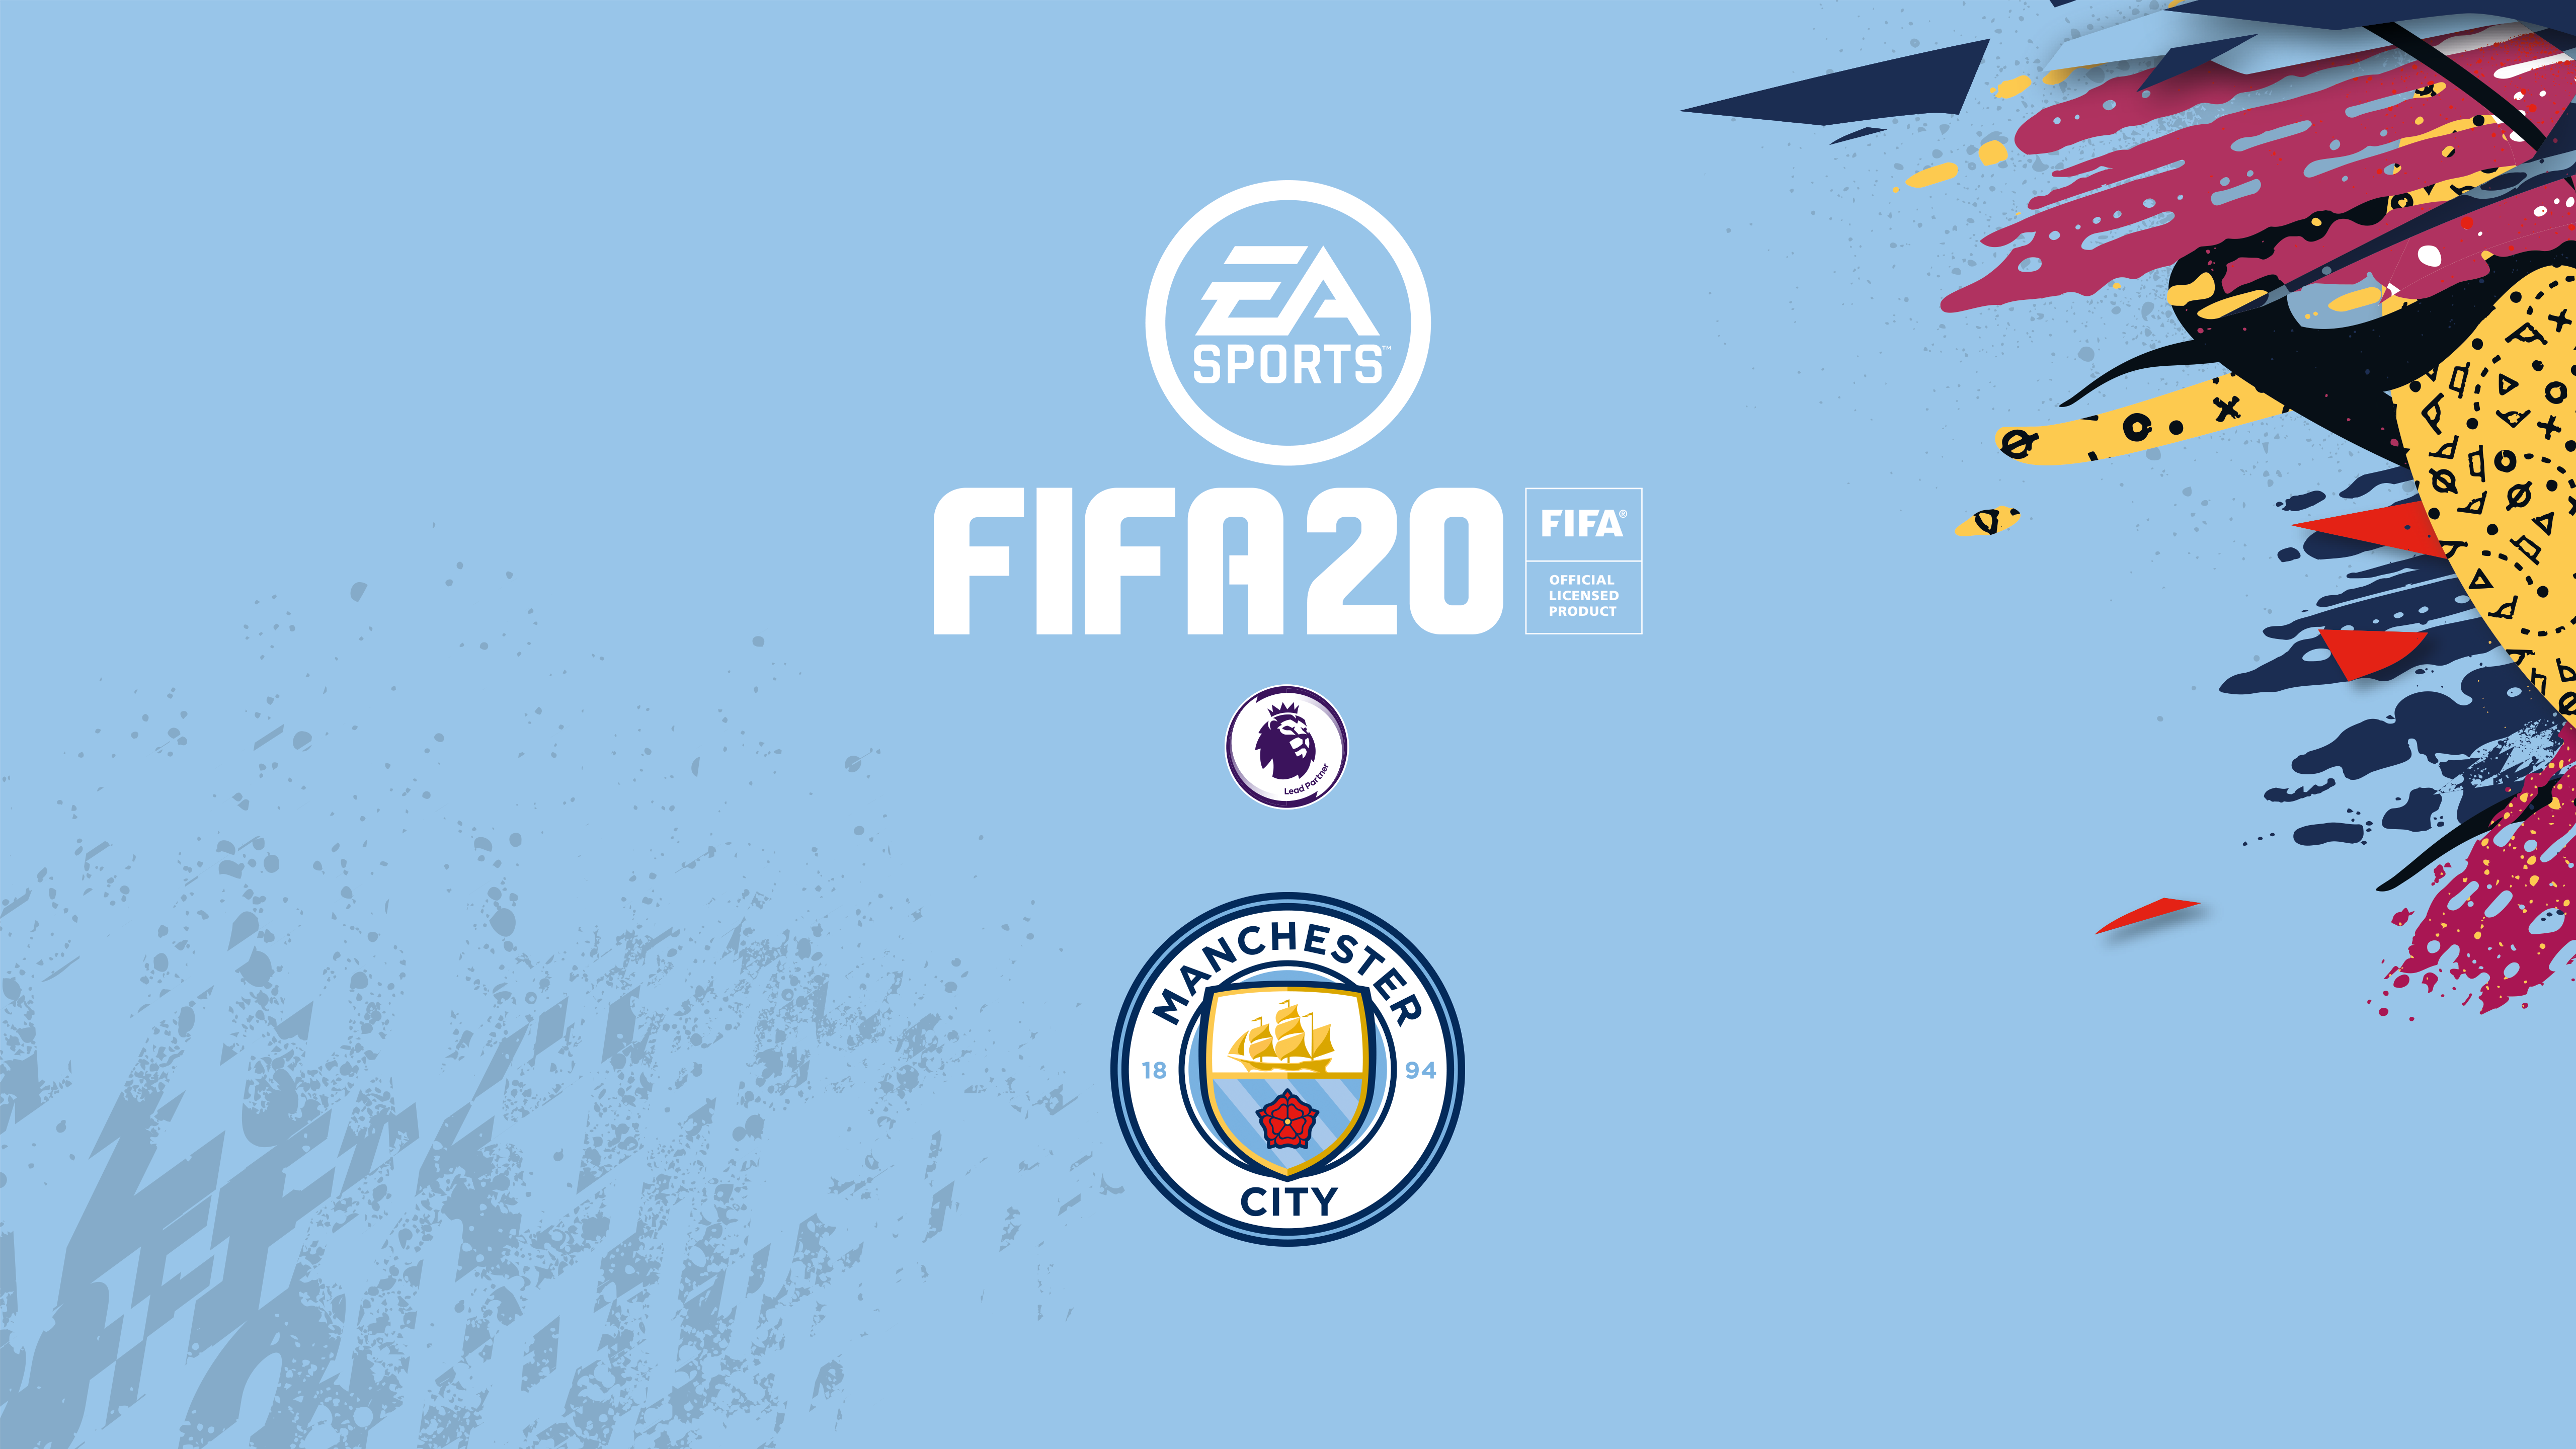 FIFA 20: Available the cover and wallpapers by Premier League |   - UK